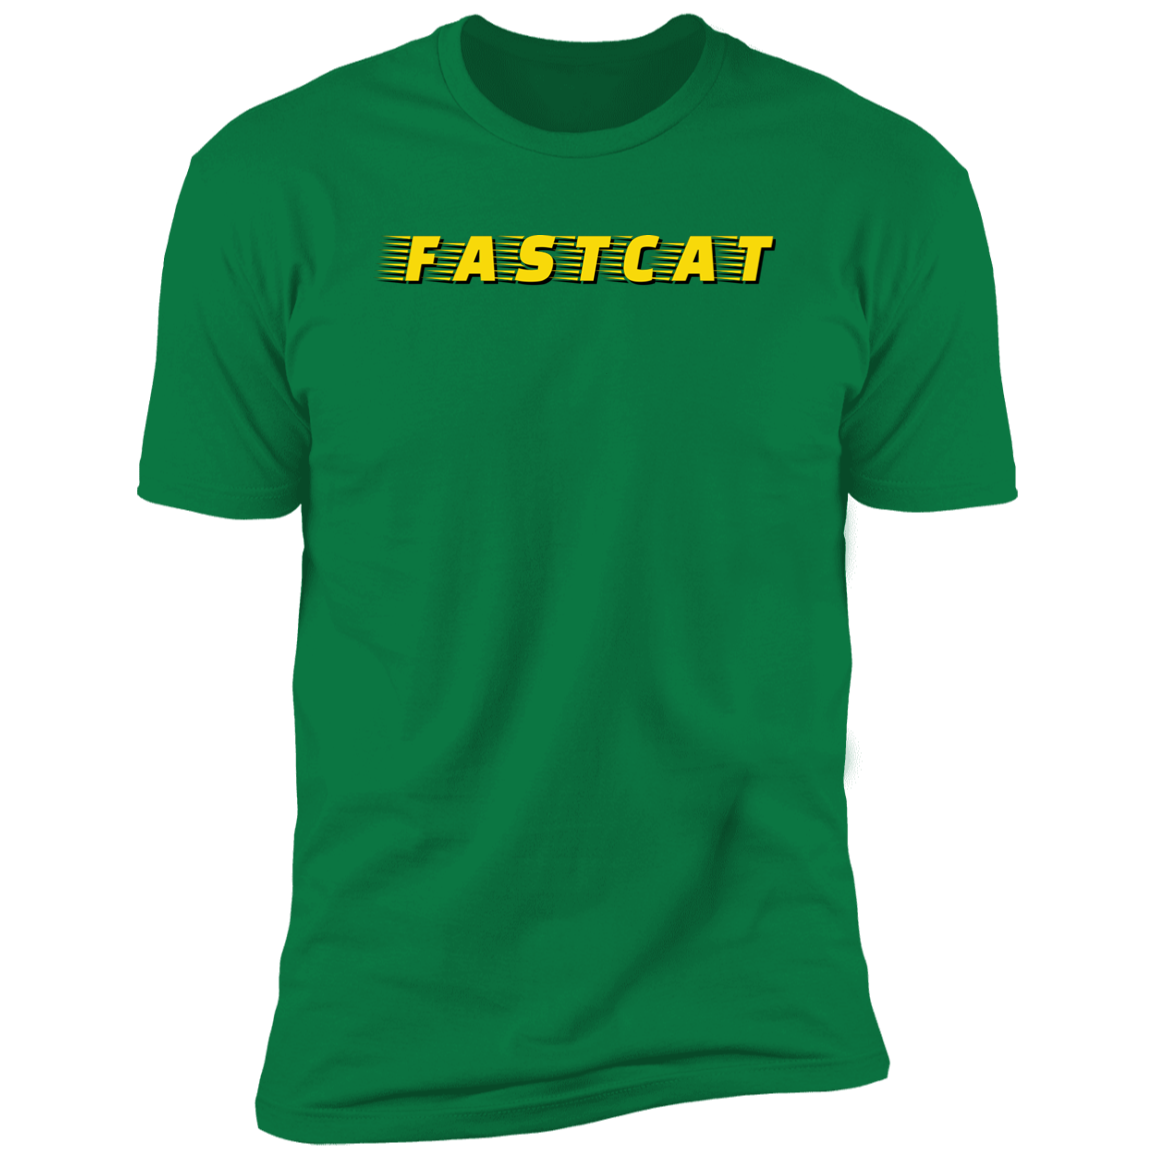 FastCAT Dog T-shirt, sporting dog t-shirt for humans, FastCAT t-shirt, in kelly green 